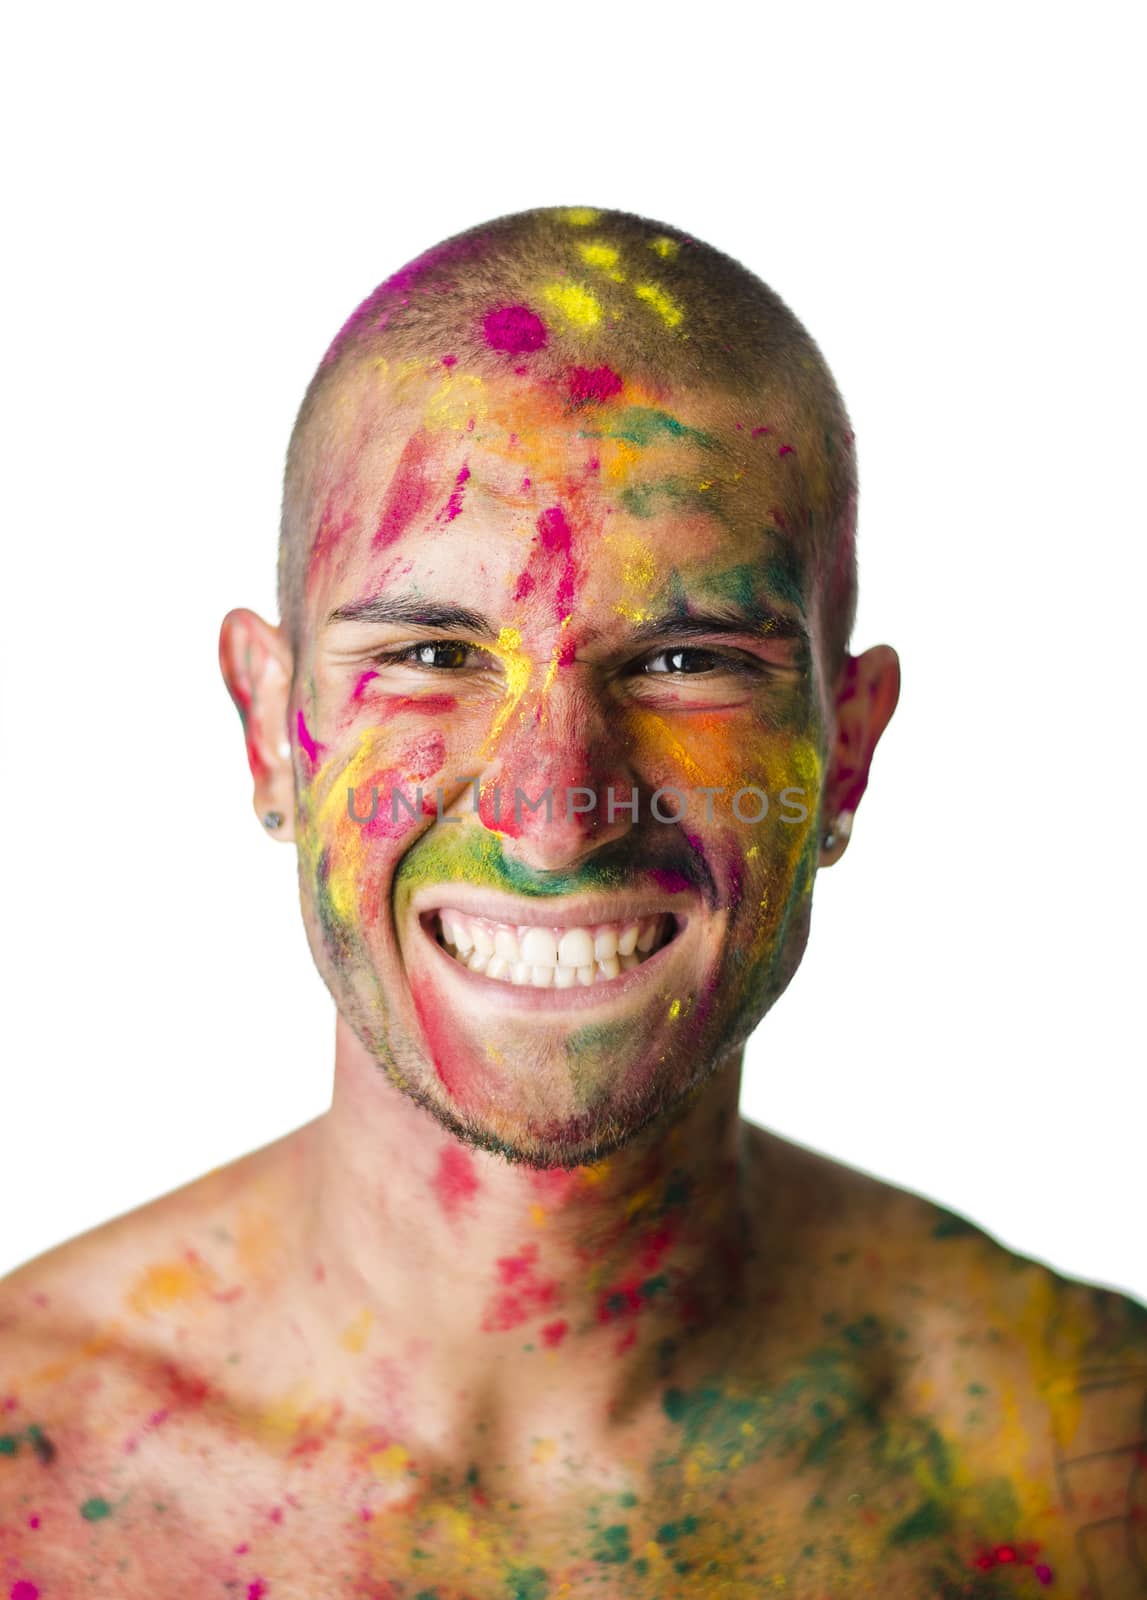 Smiling young man with skin all painted with Holi colors by artofphoto